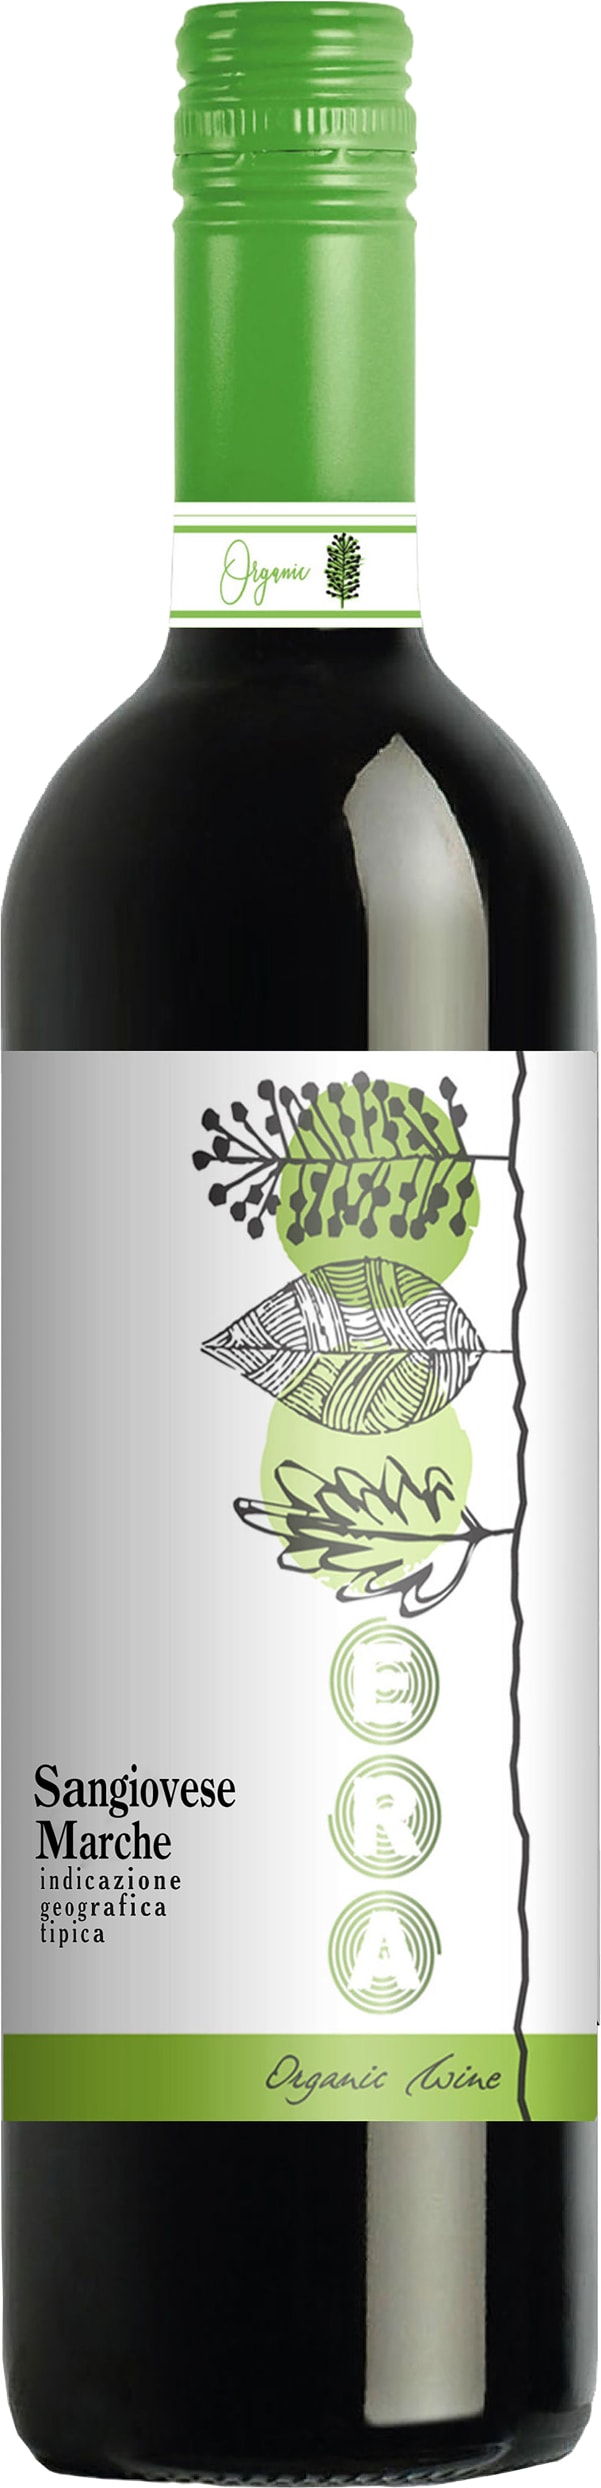 Era Organic Sangiovese 22 Cantine Volpi 75cl - Buy Volpi Wines from GREAT WINES DIRECT wine shop